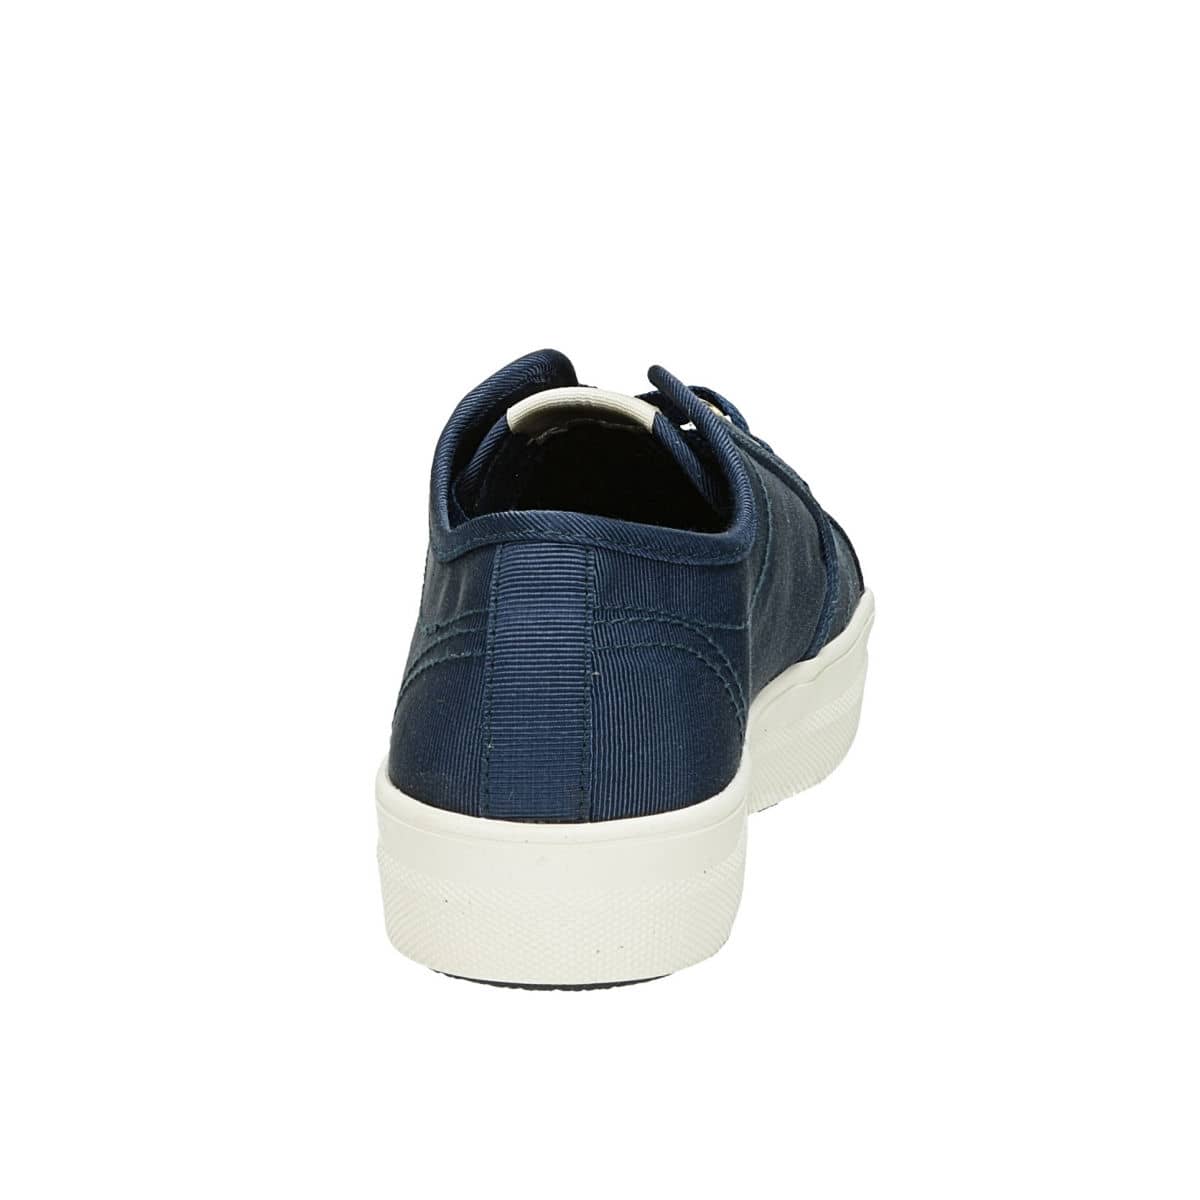 sneakers on white sole - dark blue | Robel.shoes